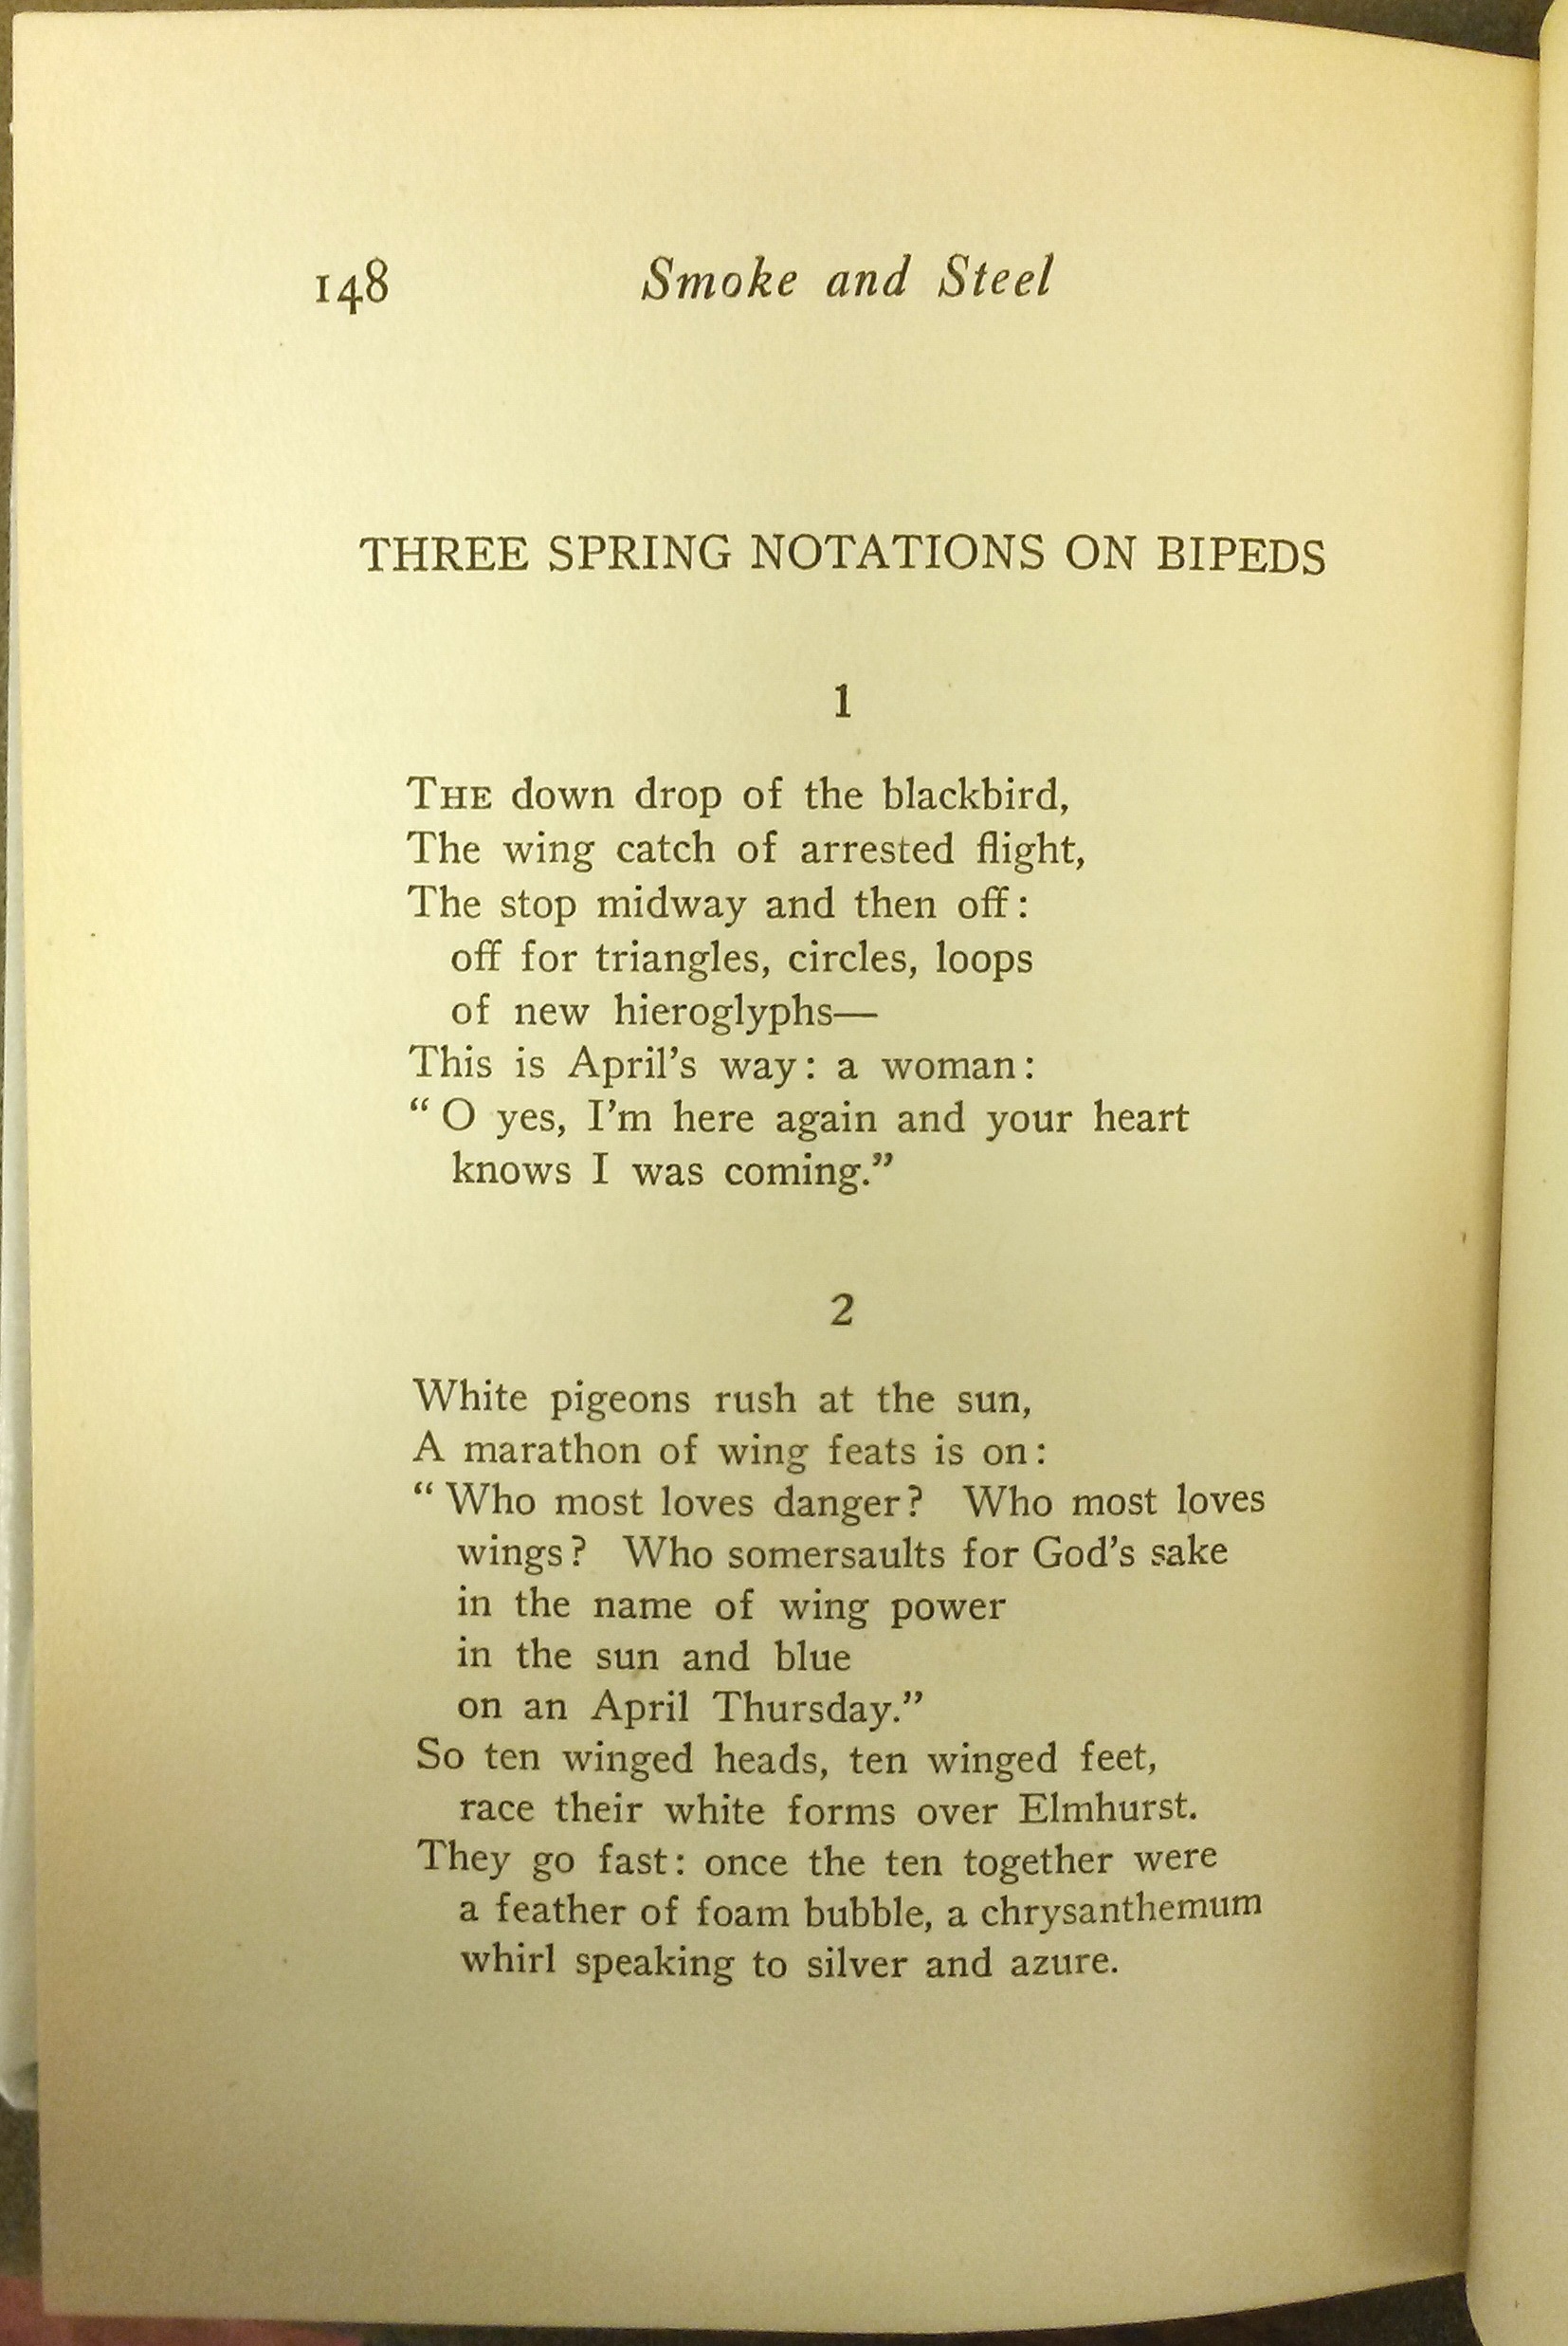 Text of "Three Notations on Bipeds" 